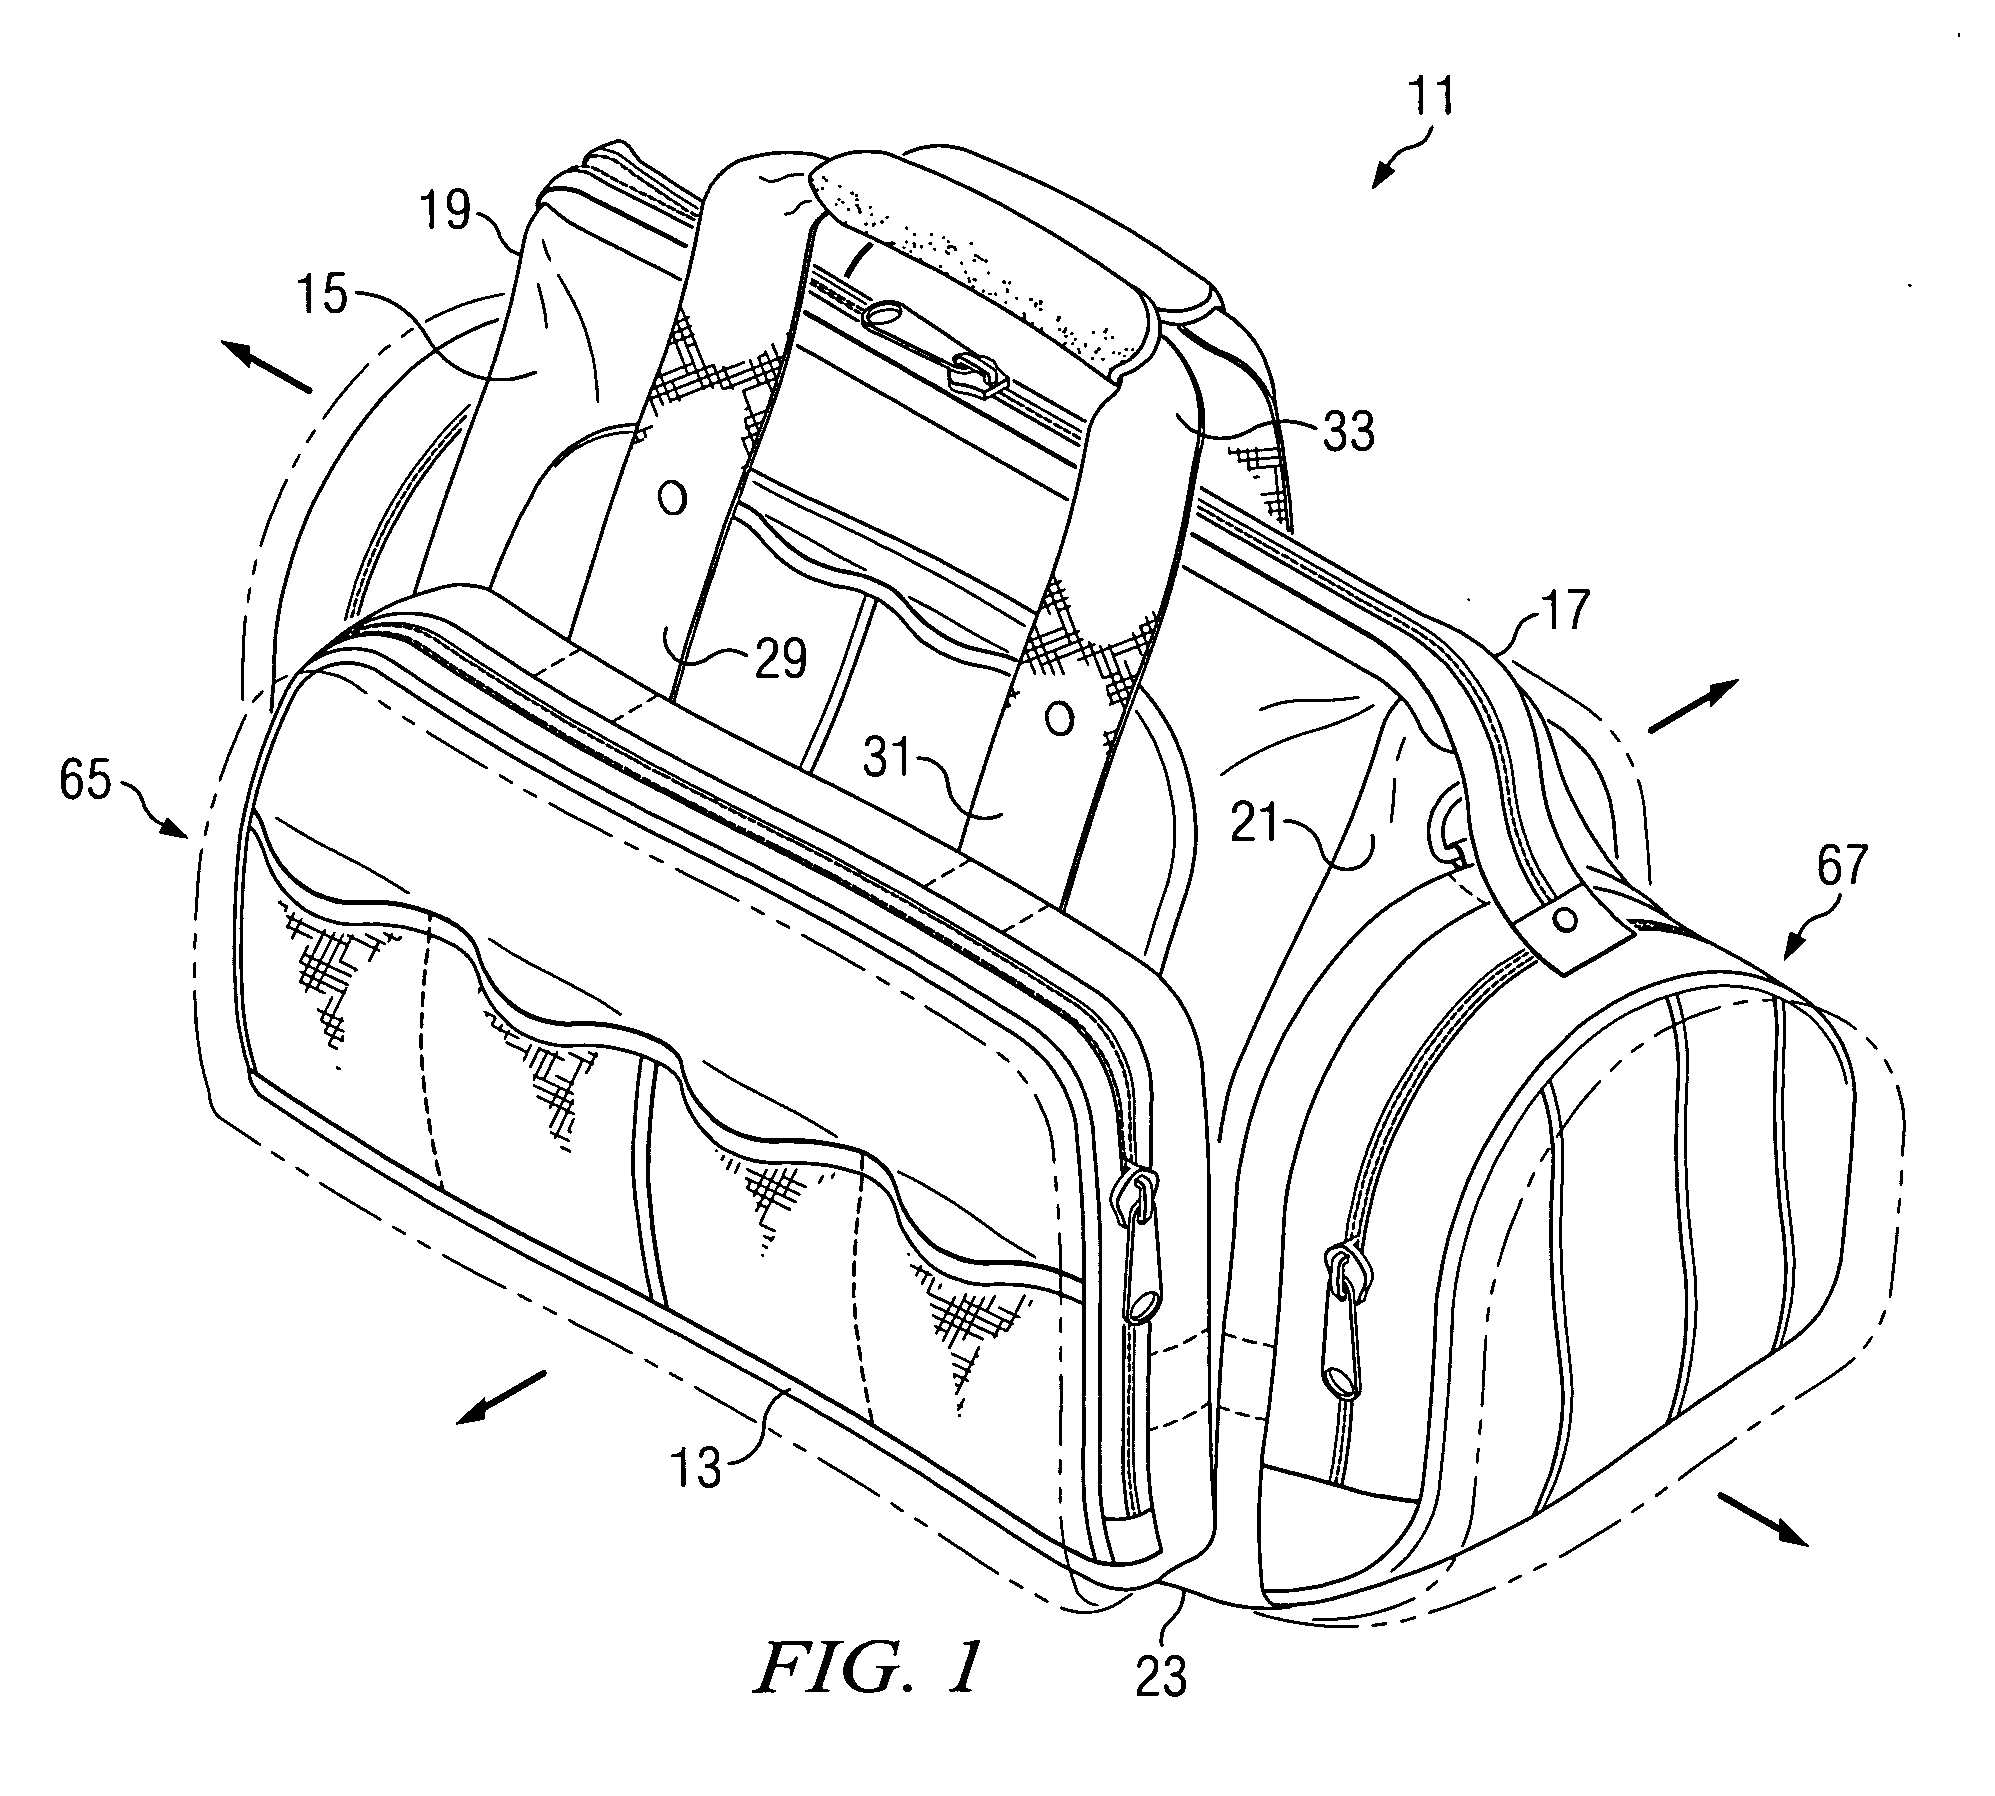 Toolbag with expandible pockets